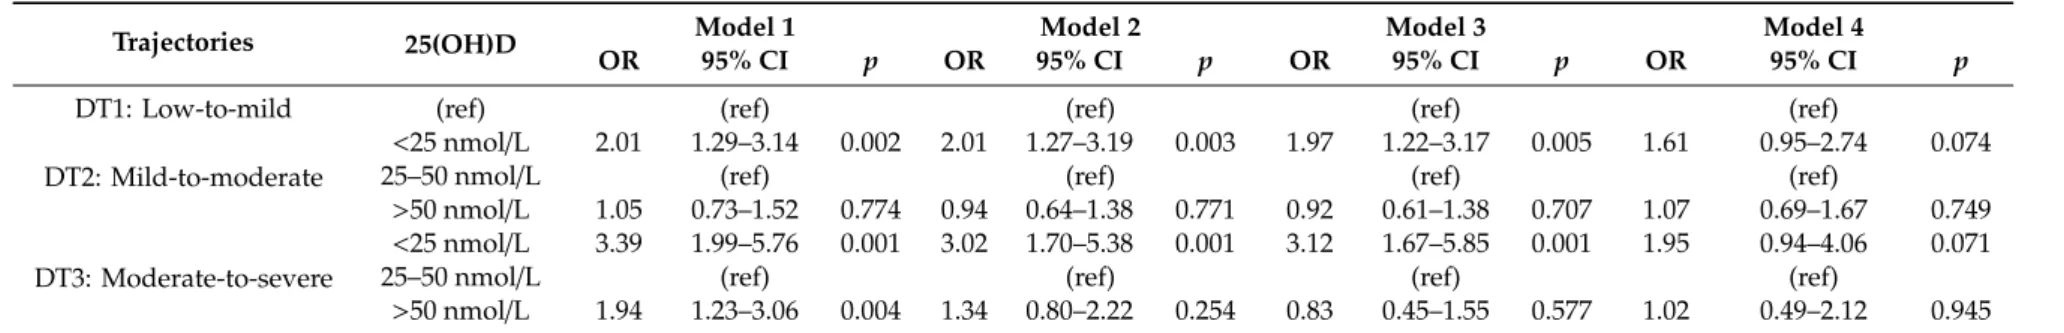 Table 2. Association between 25(OH)D concentration and disability trajectories.